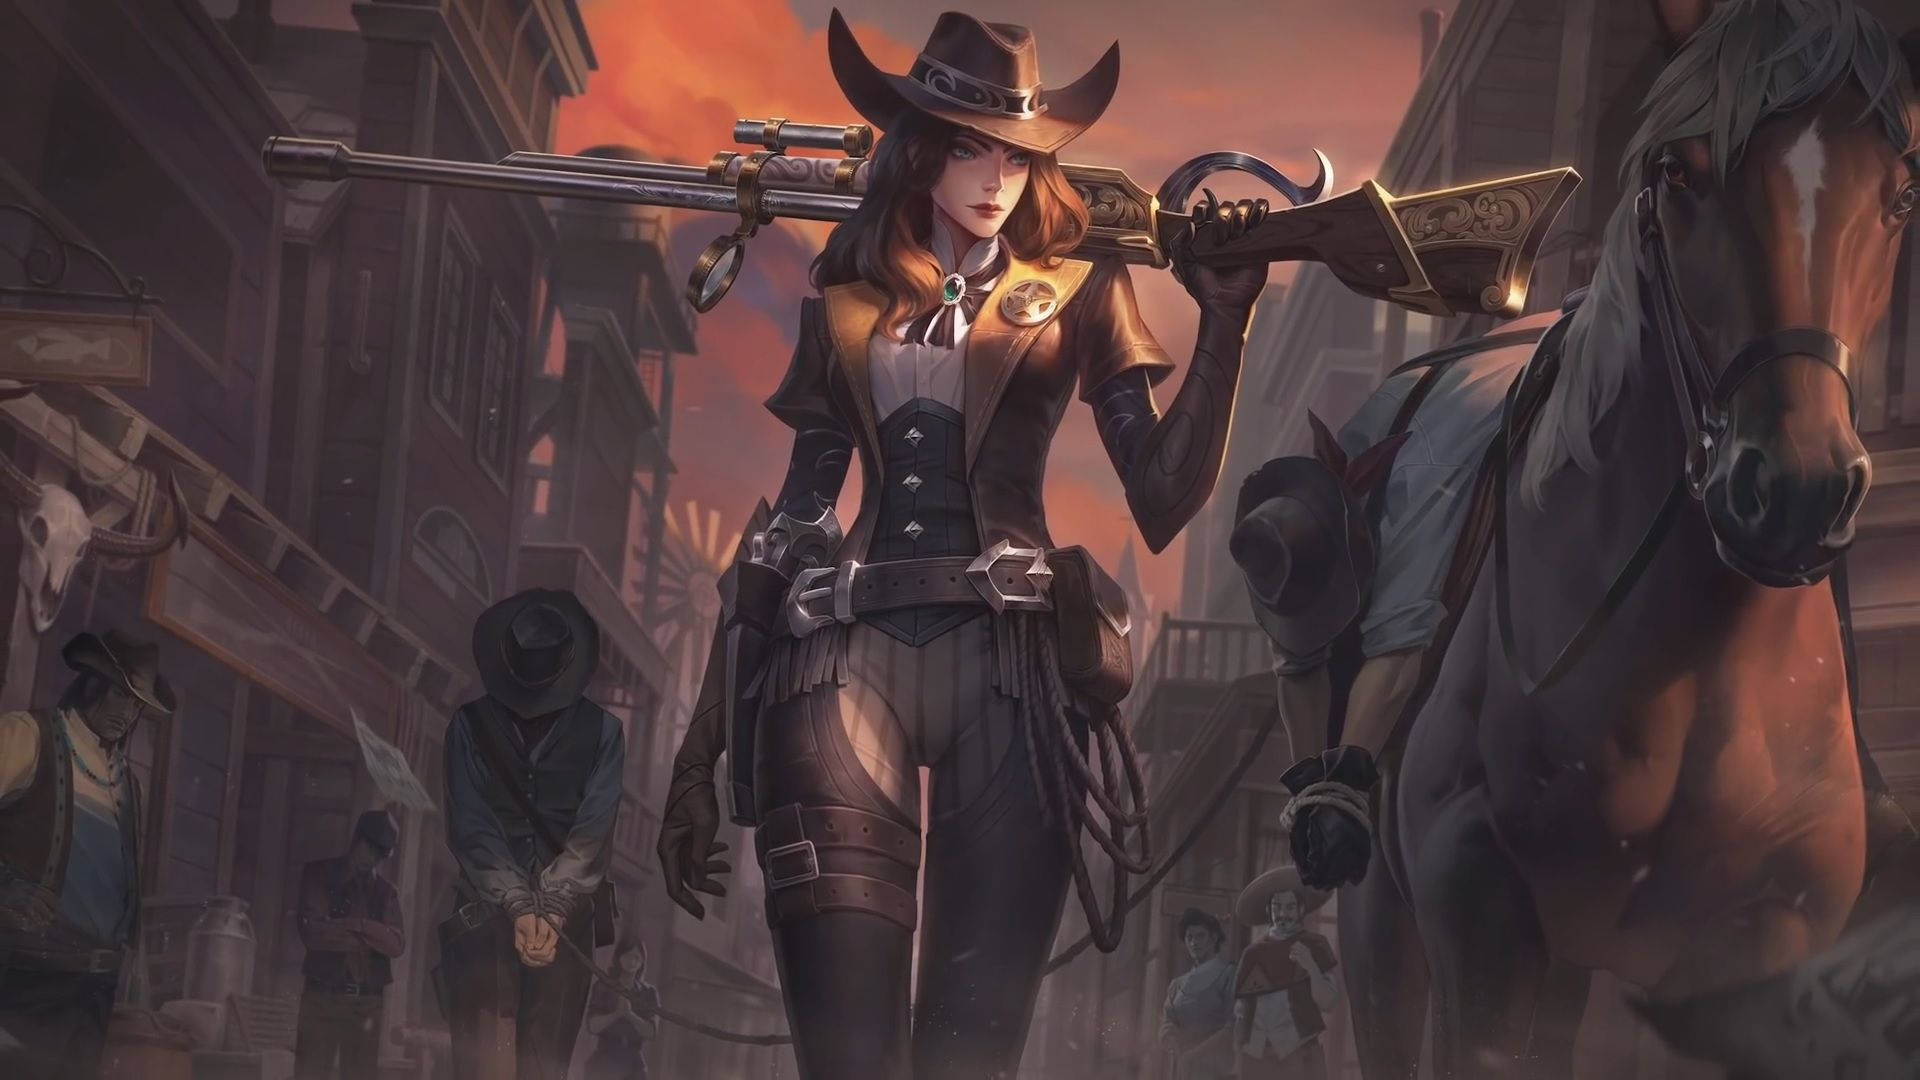 Cool Cowgirl Wallpaper